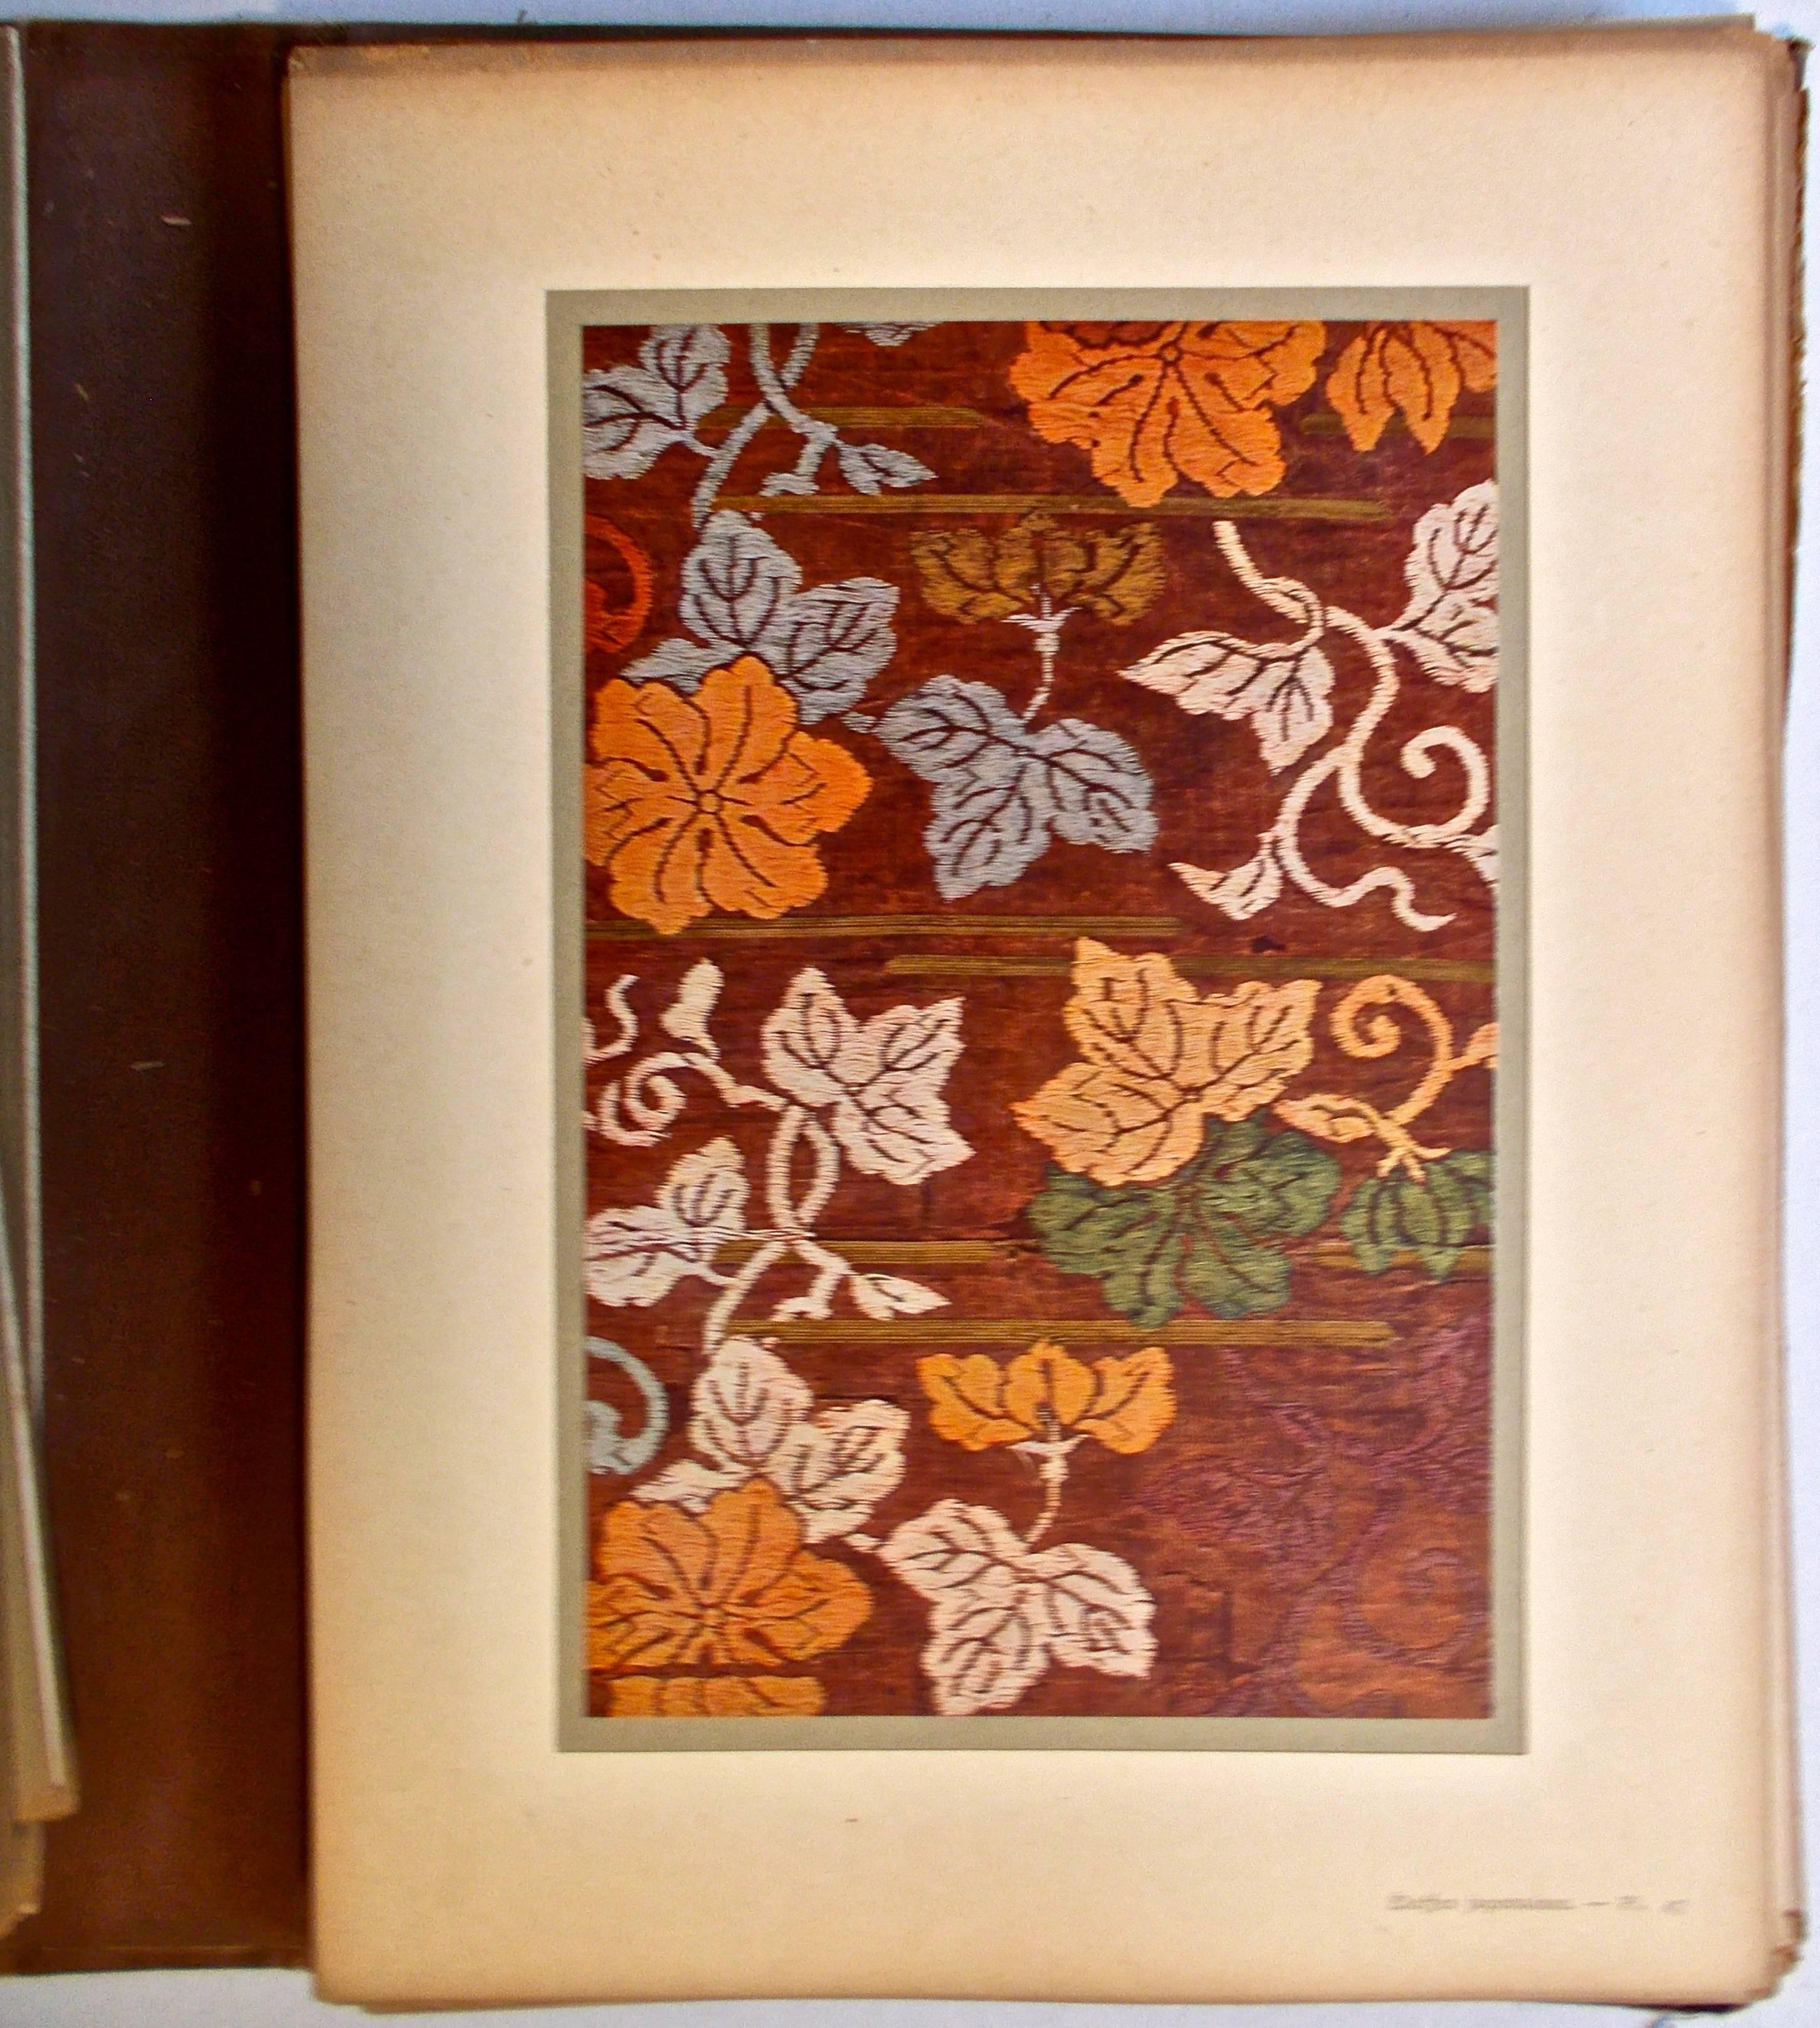 Etoffes Japonaises 'Tissues Et Brochees' Complete Folio of Fabric Designs In Good Condition For Sale In Sharon, CT